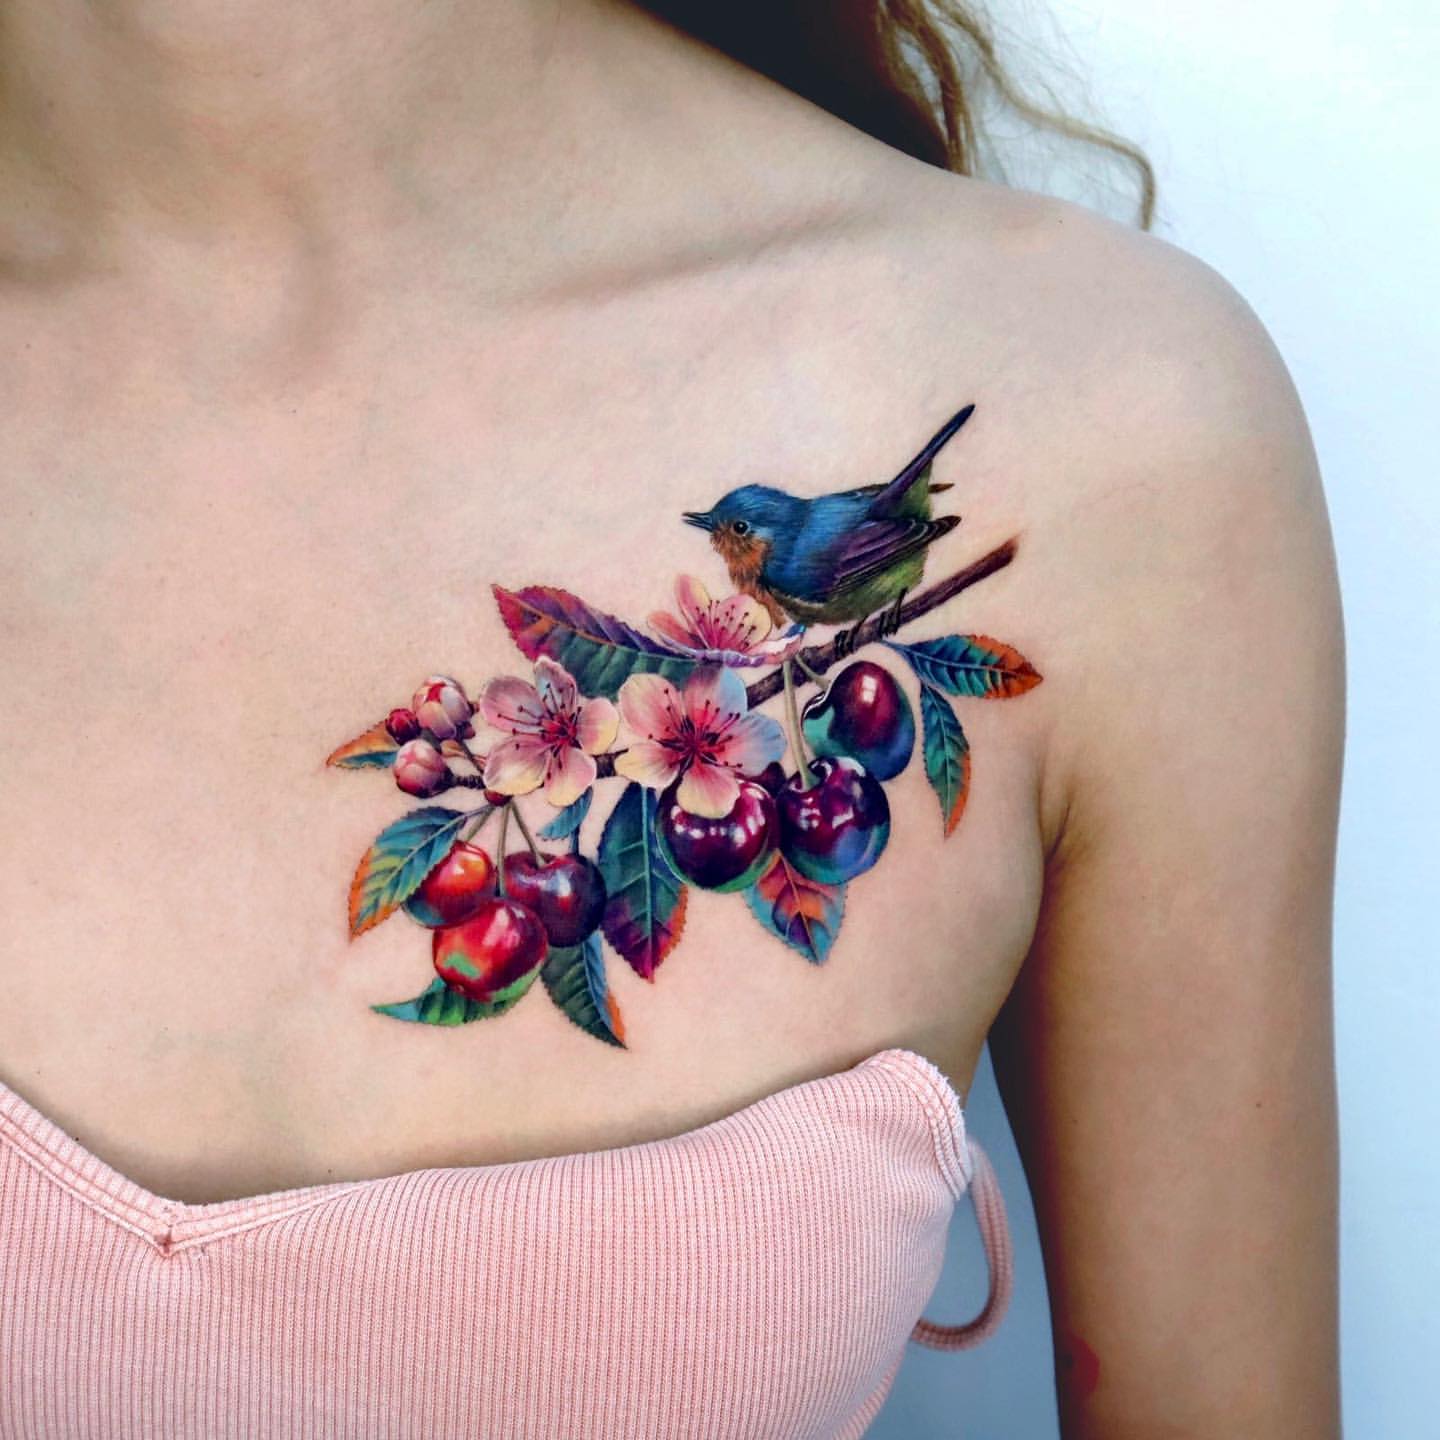 Chest Tattoos Ideas for Women 14